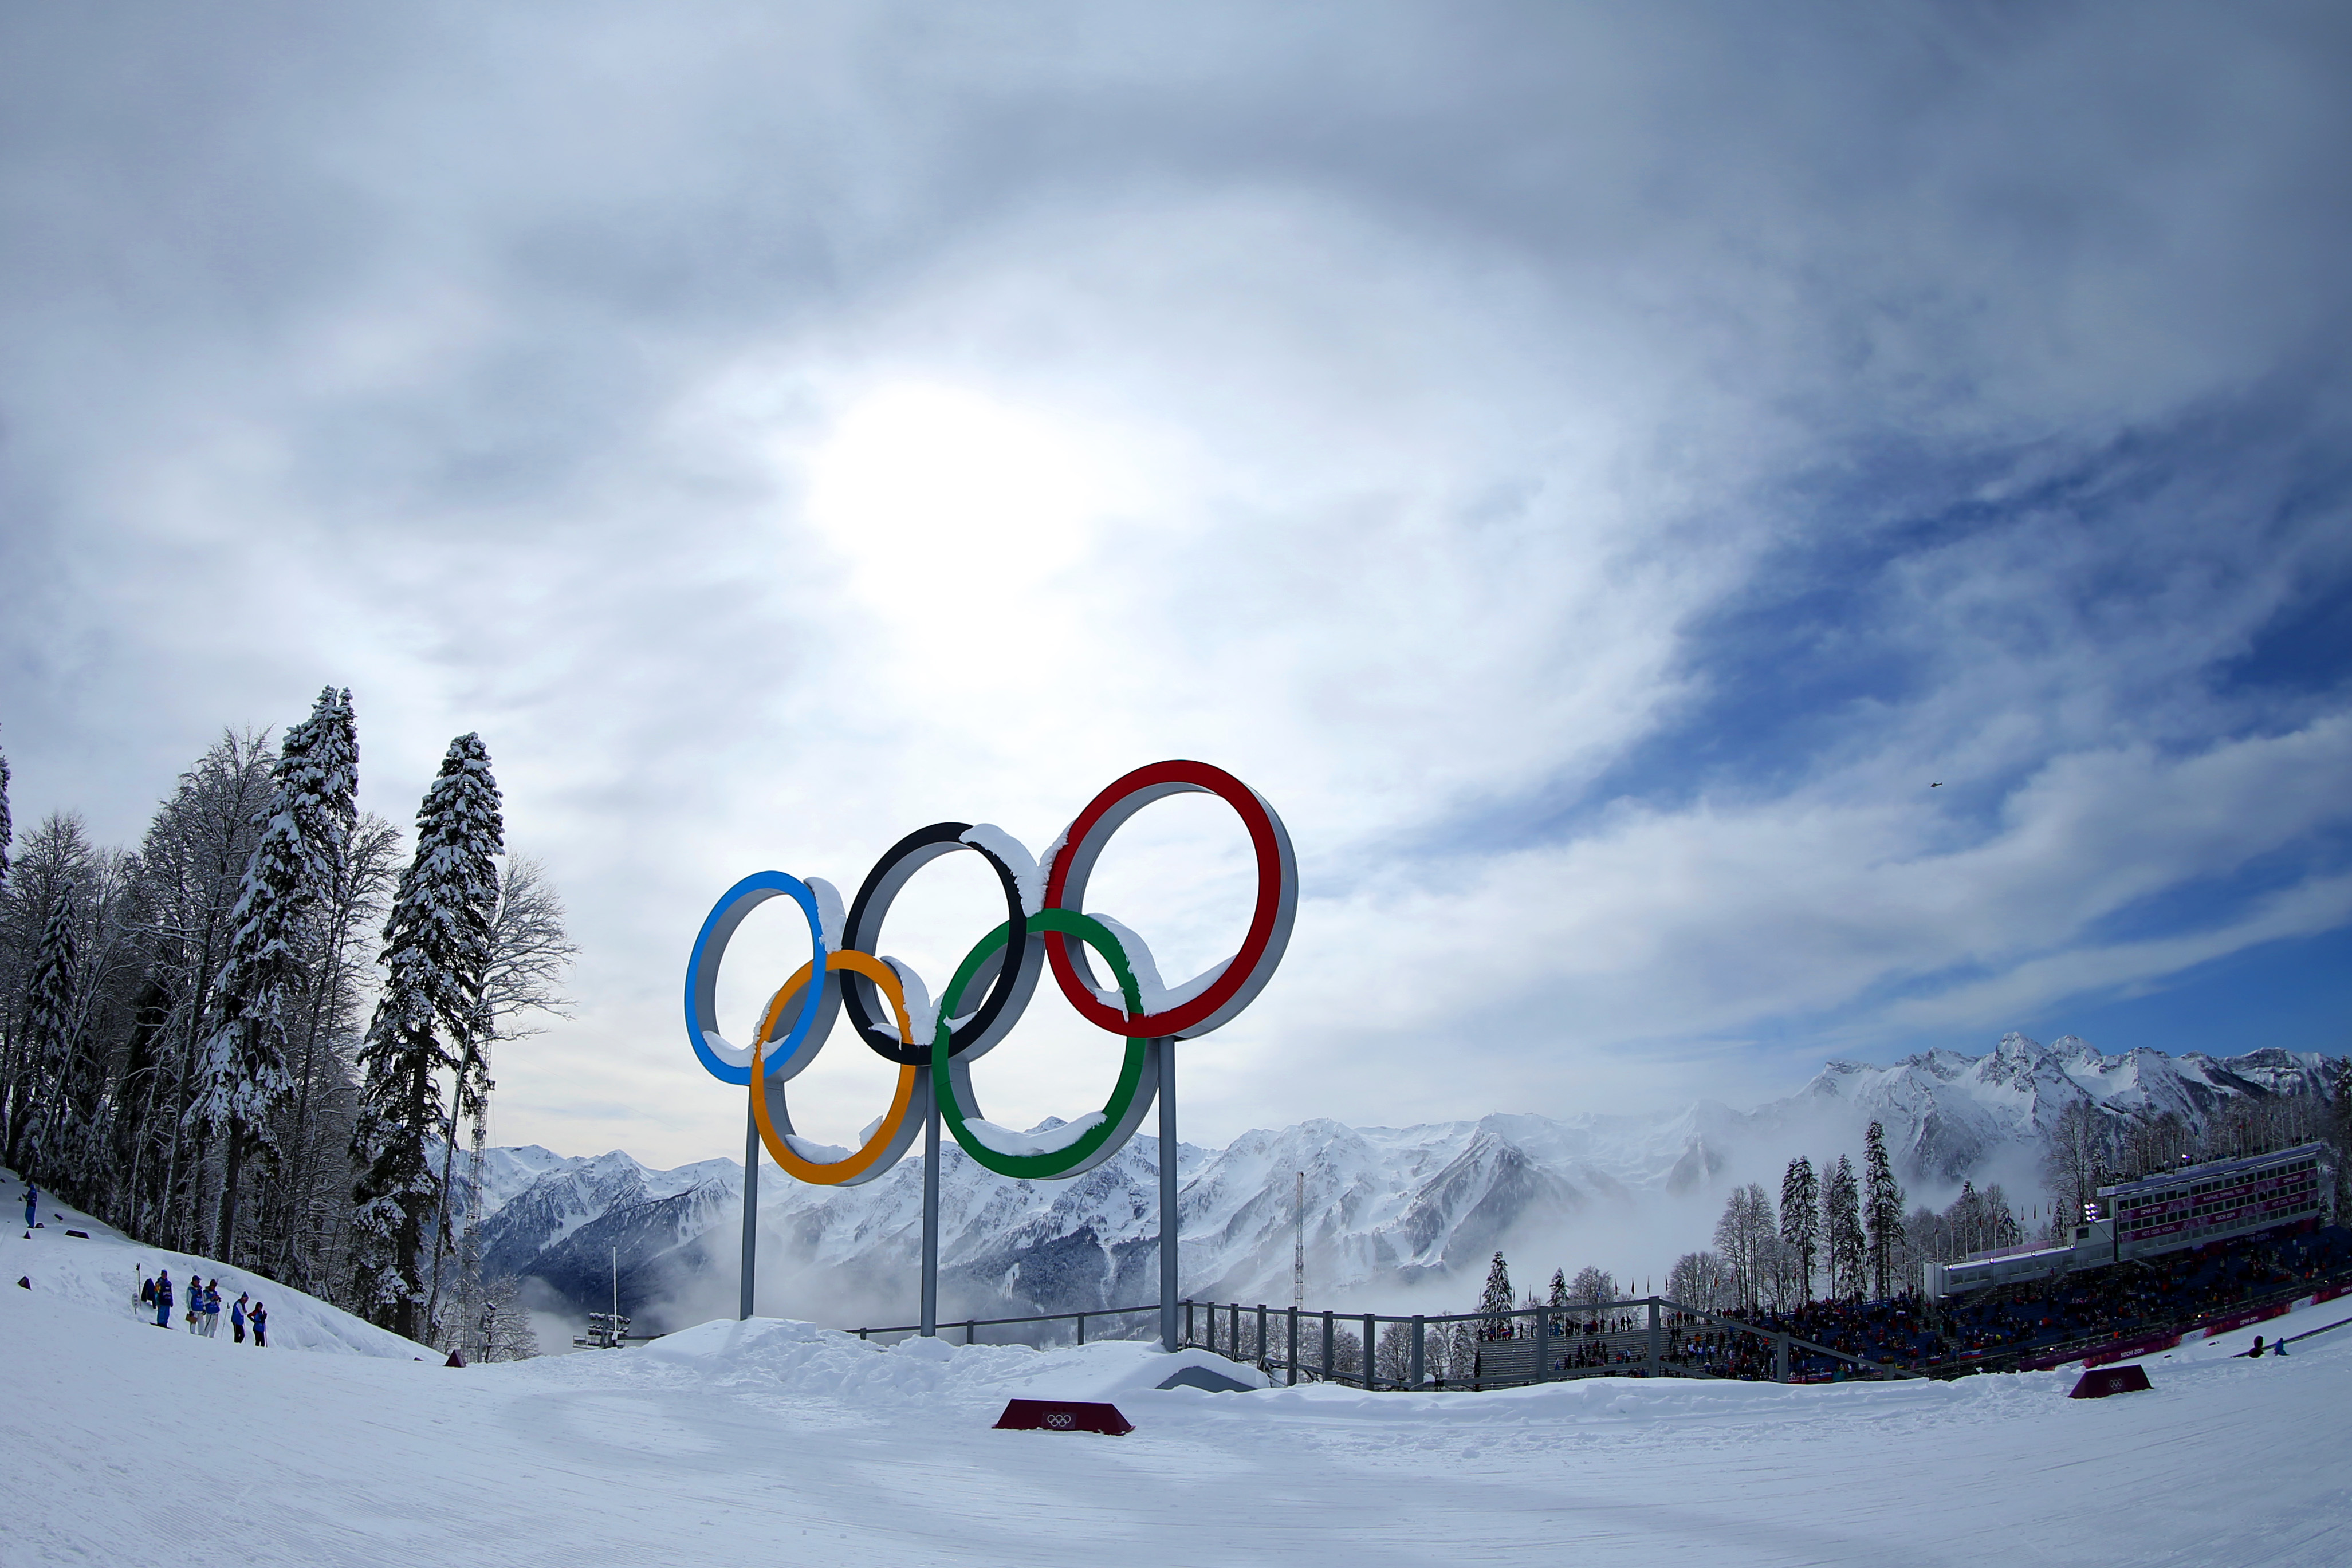 2018 Winter Olympics: No One's Buying Tickets | Fortune